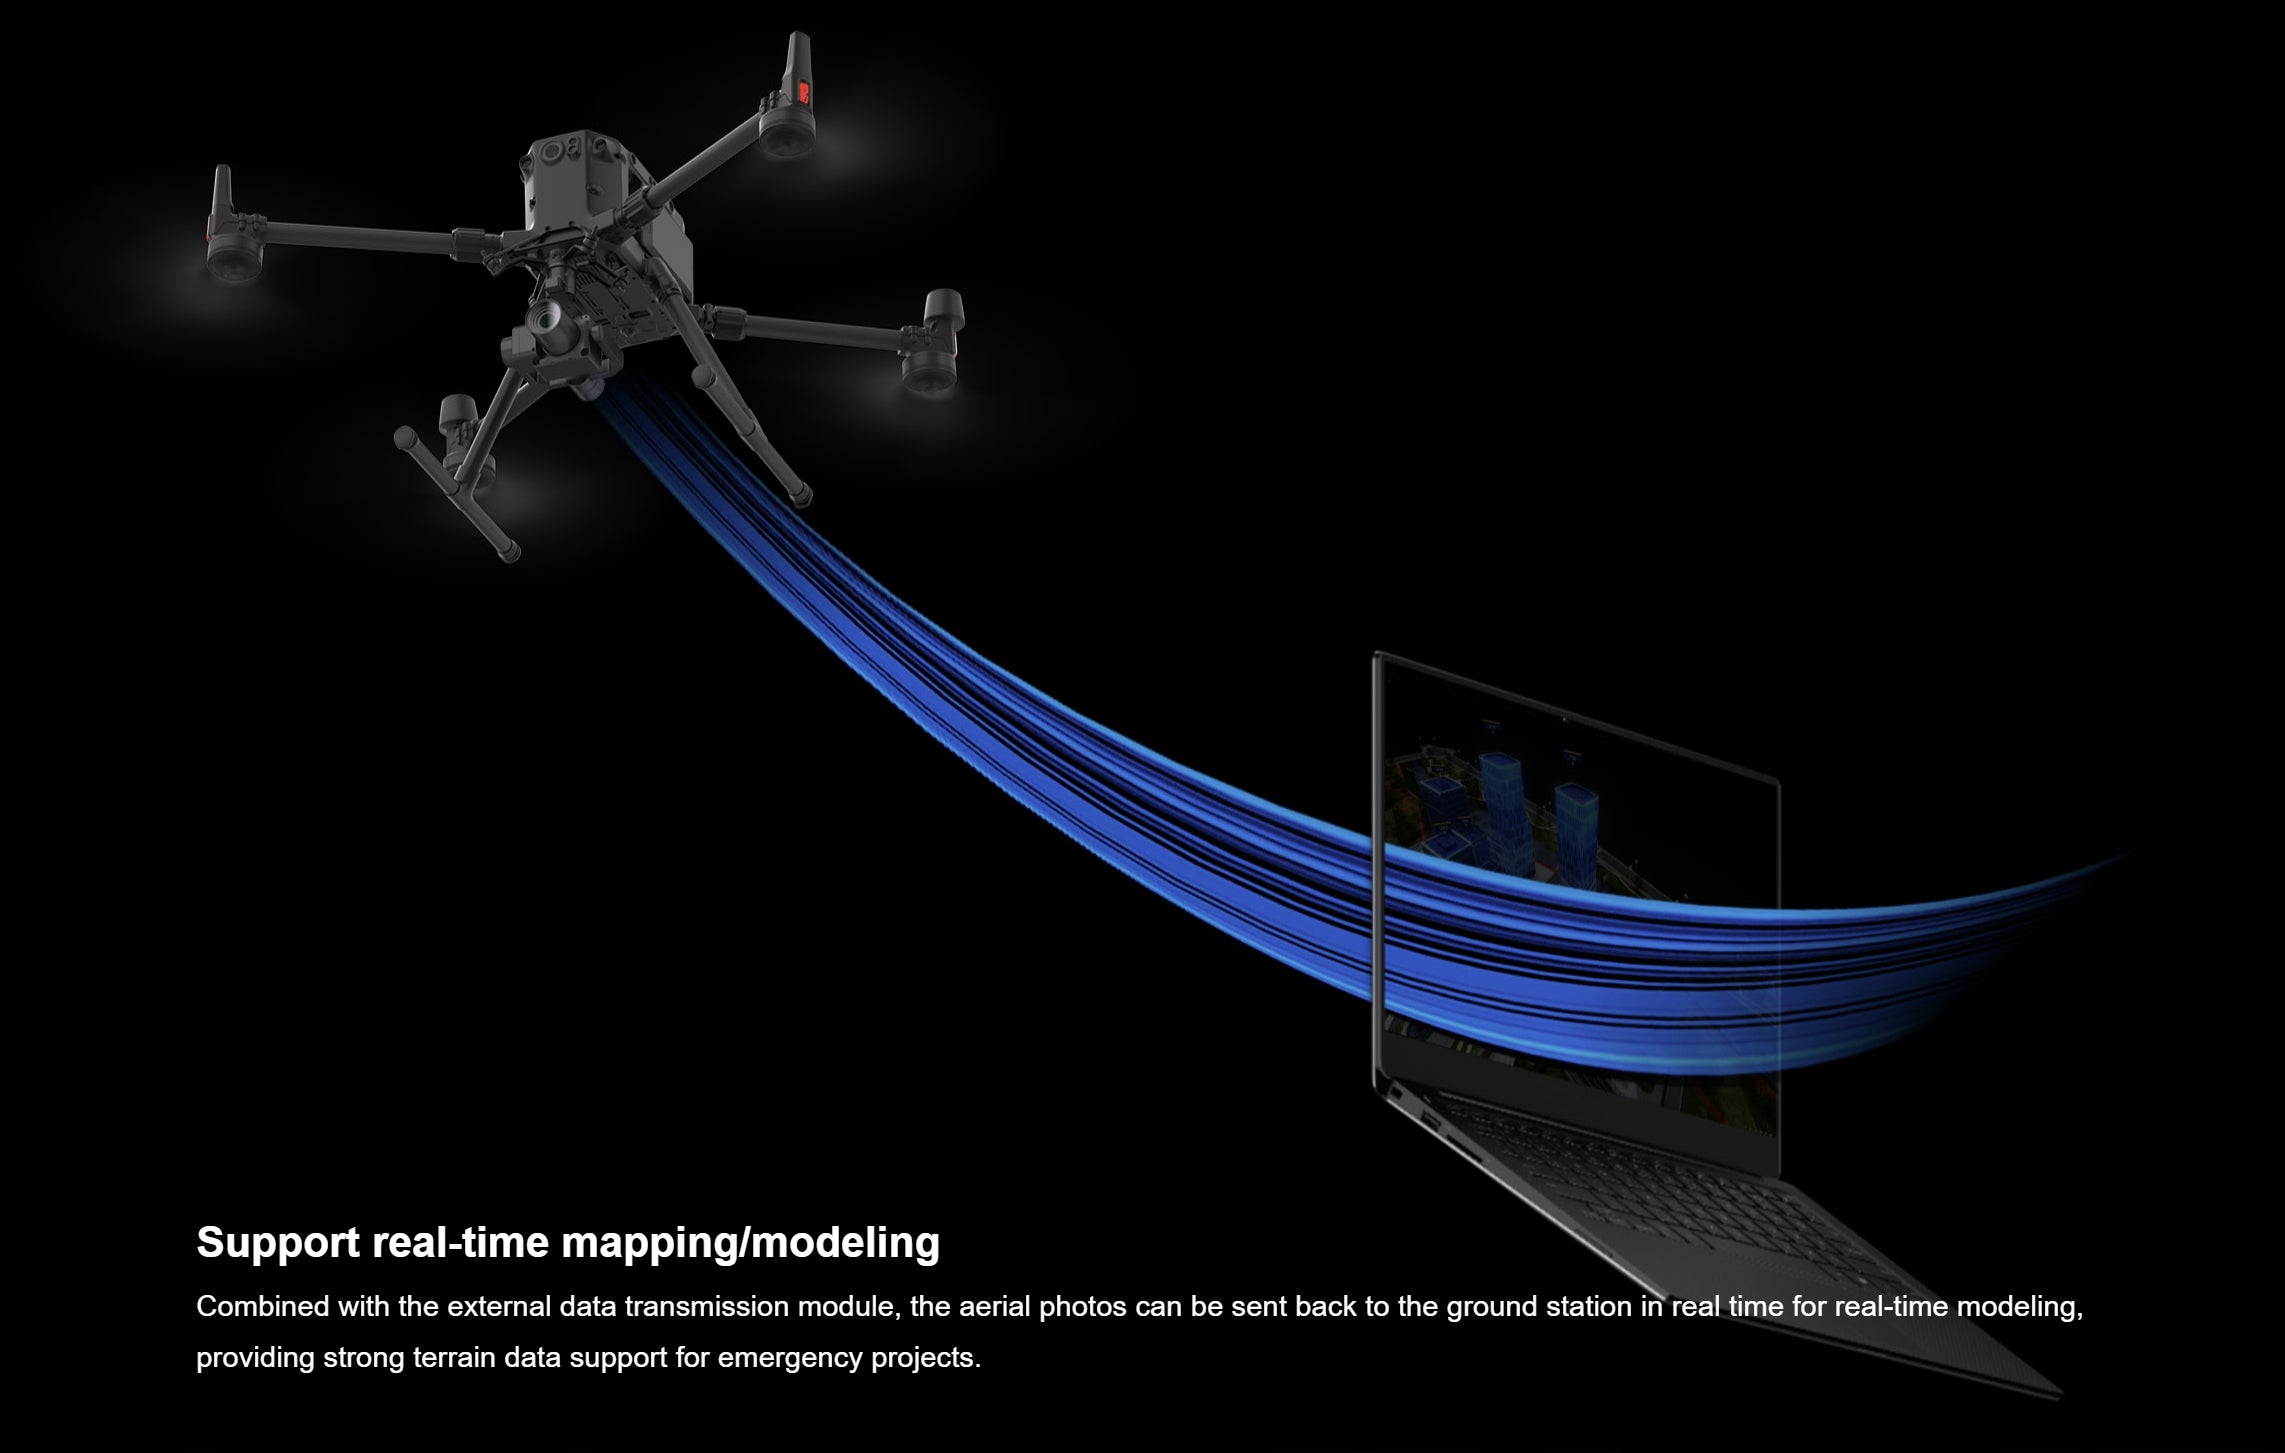 SHARE 6100X, Real-time aerial photography and data transmission enables instant processing and modeling for emergency response.